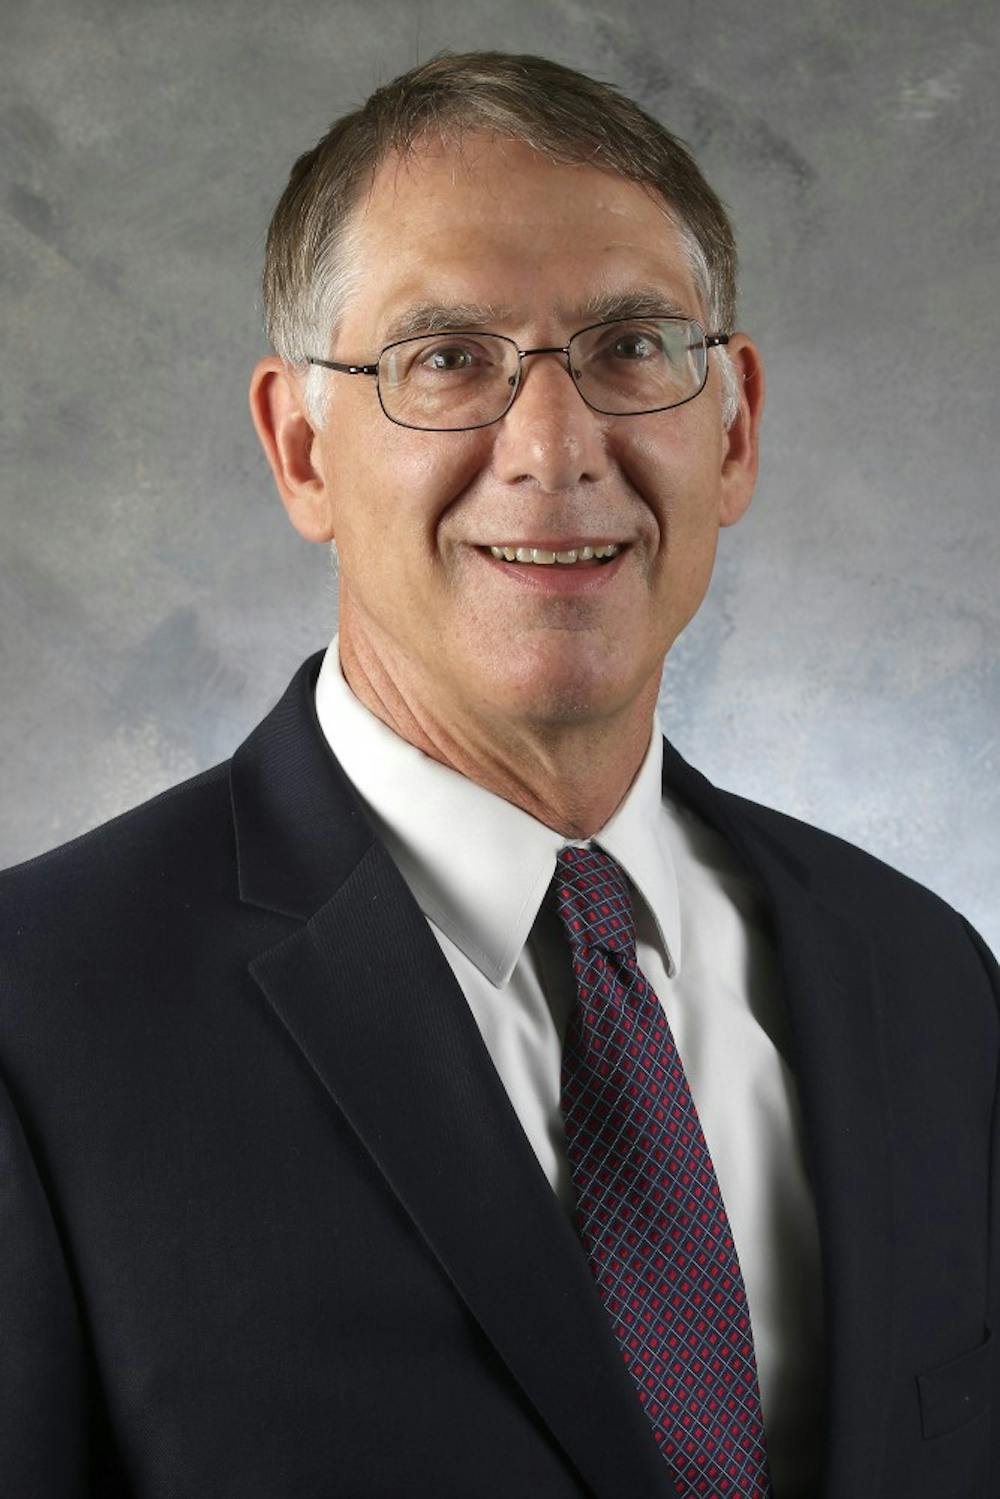 <p>Stephen Ferris will be the next dean for Ball State's Miller College of Business, according to a press release, after a nearly year search. His appointment begins July 1. <strong>Marc Ransford, Photo Provided</strong></p>